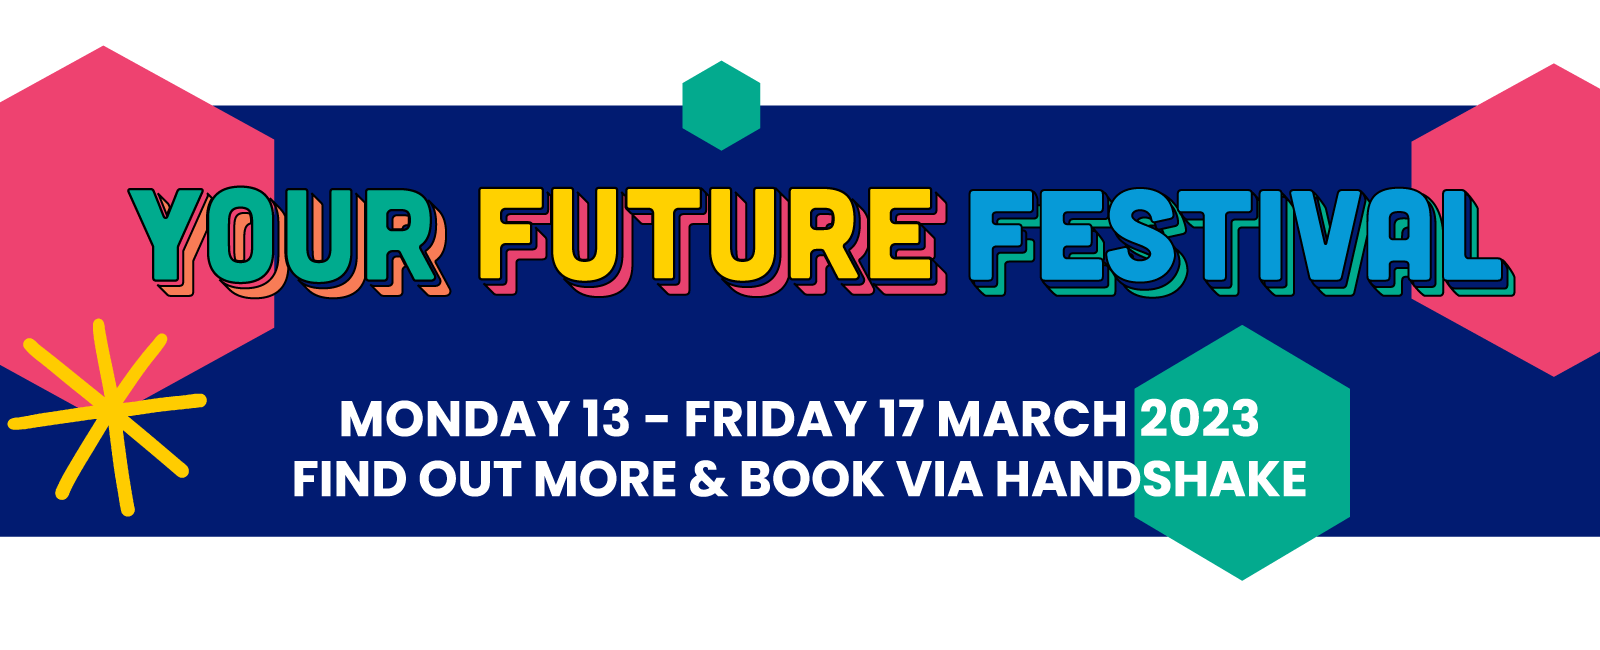 Your Future Festival - Find out more